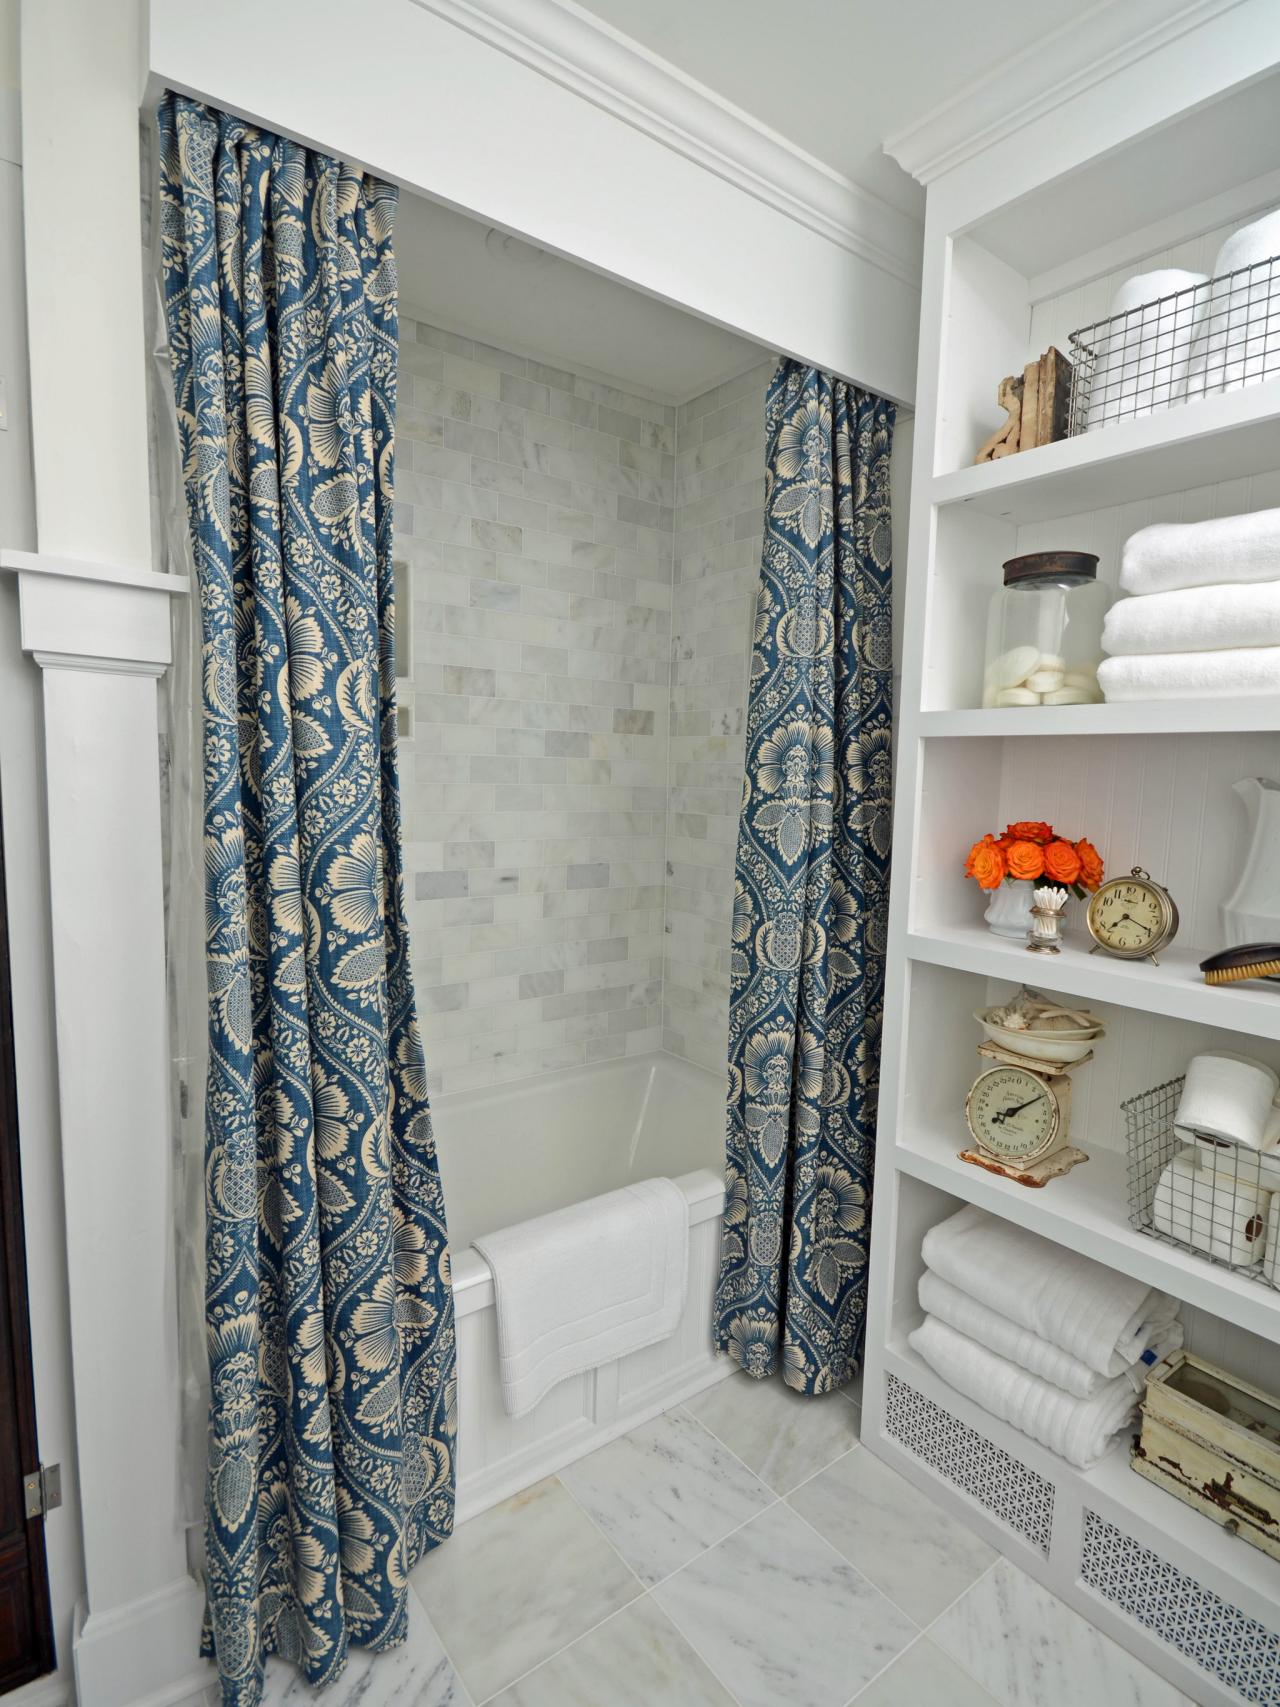 Wooden Cornice For A Shower, Shower Curtain Rod For Ceramic Tile